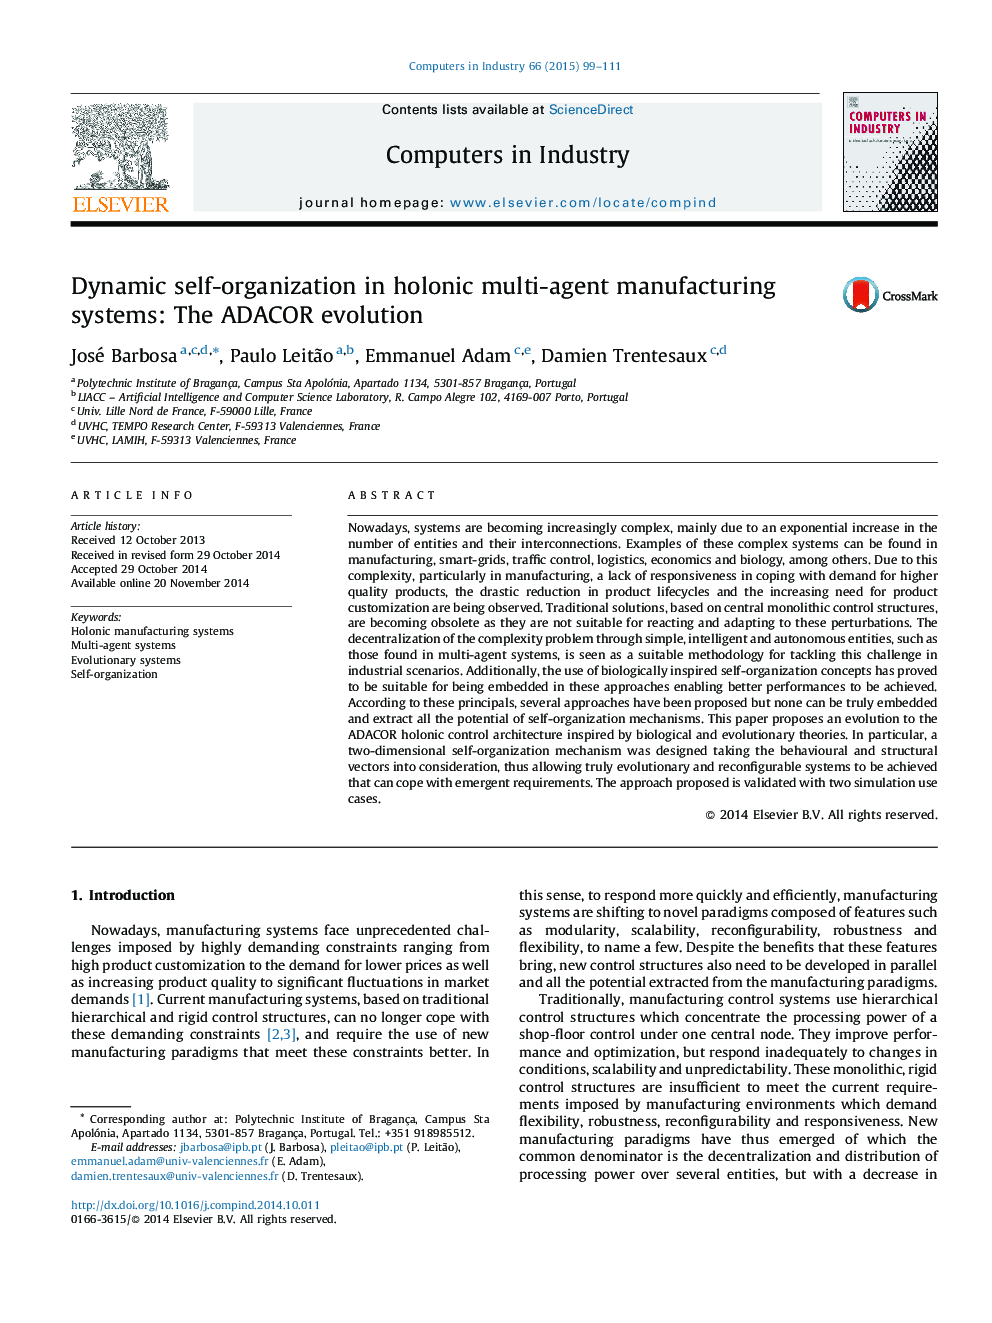 Dynamic self-organization in holonic multi-agent manufacturing systems: The ADACOR evolution